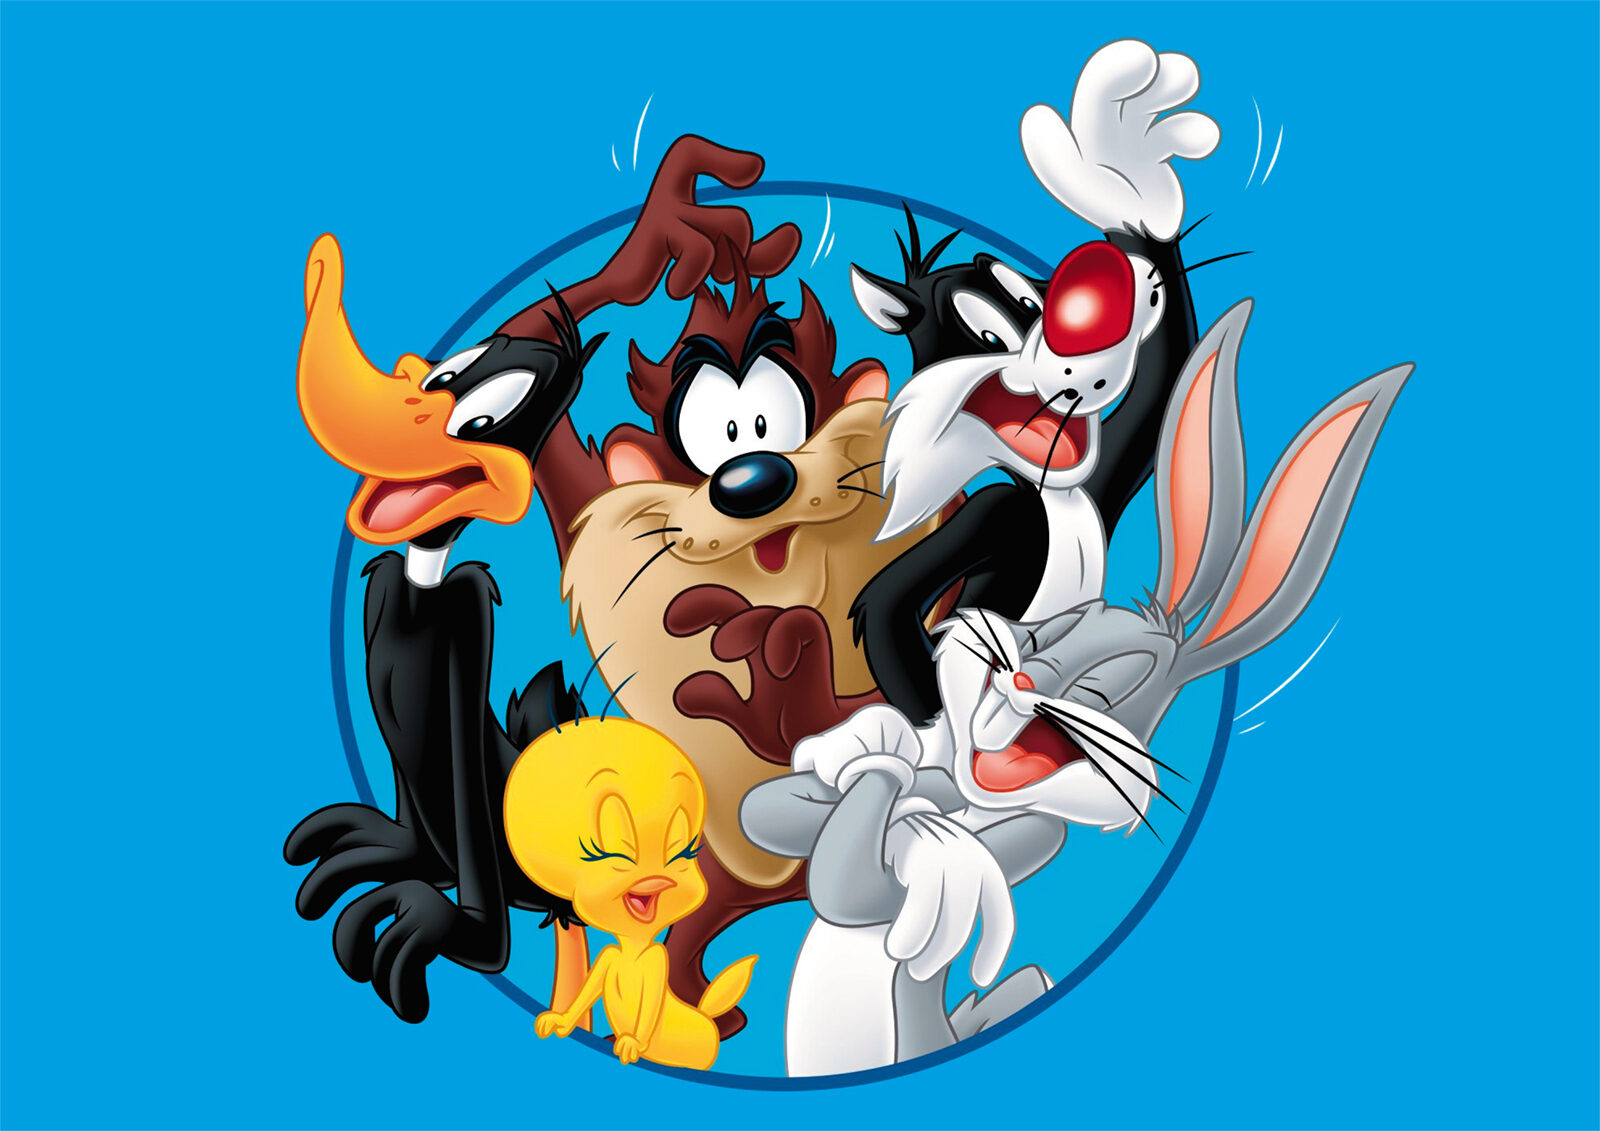 Looney Tunes Cartoon Characters Poster